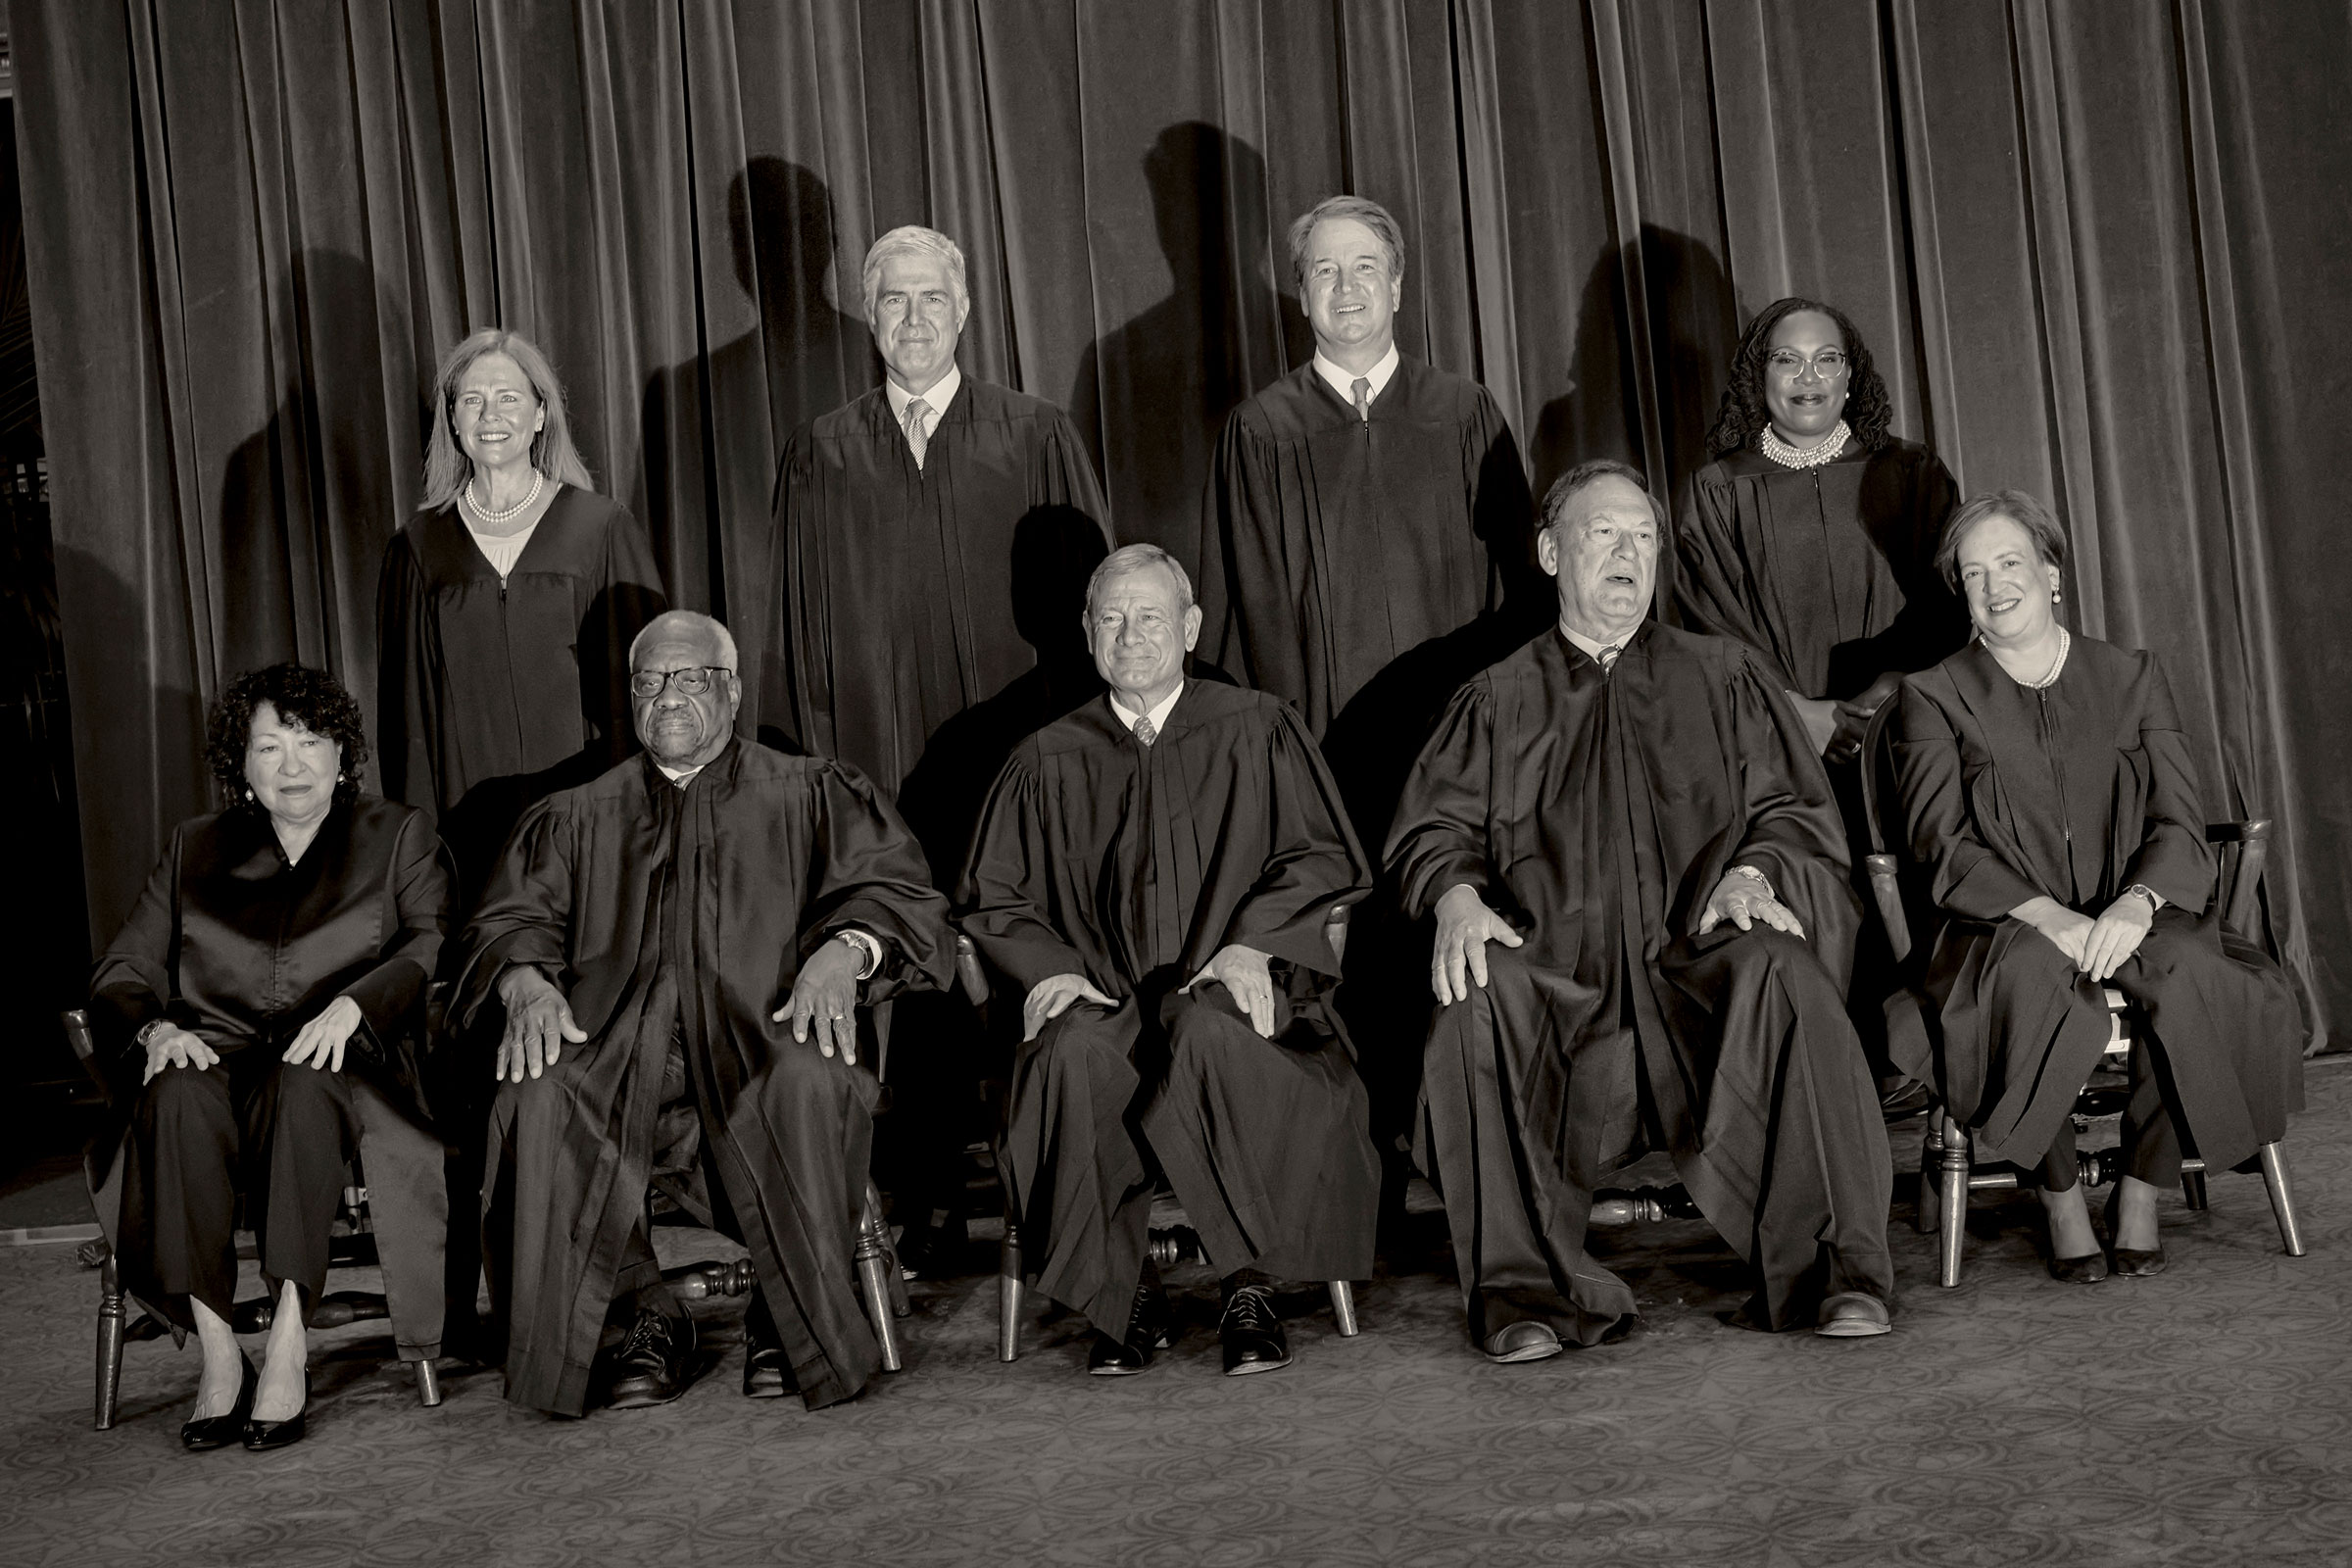 Justices of the U.S. Supreme Court pose for their official photo at the Supreme Court in Washington, on Oct. 7. (Philip Montgomery for TIME)